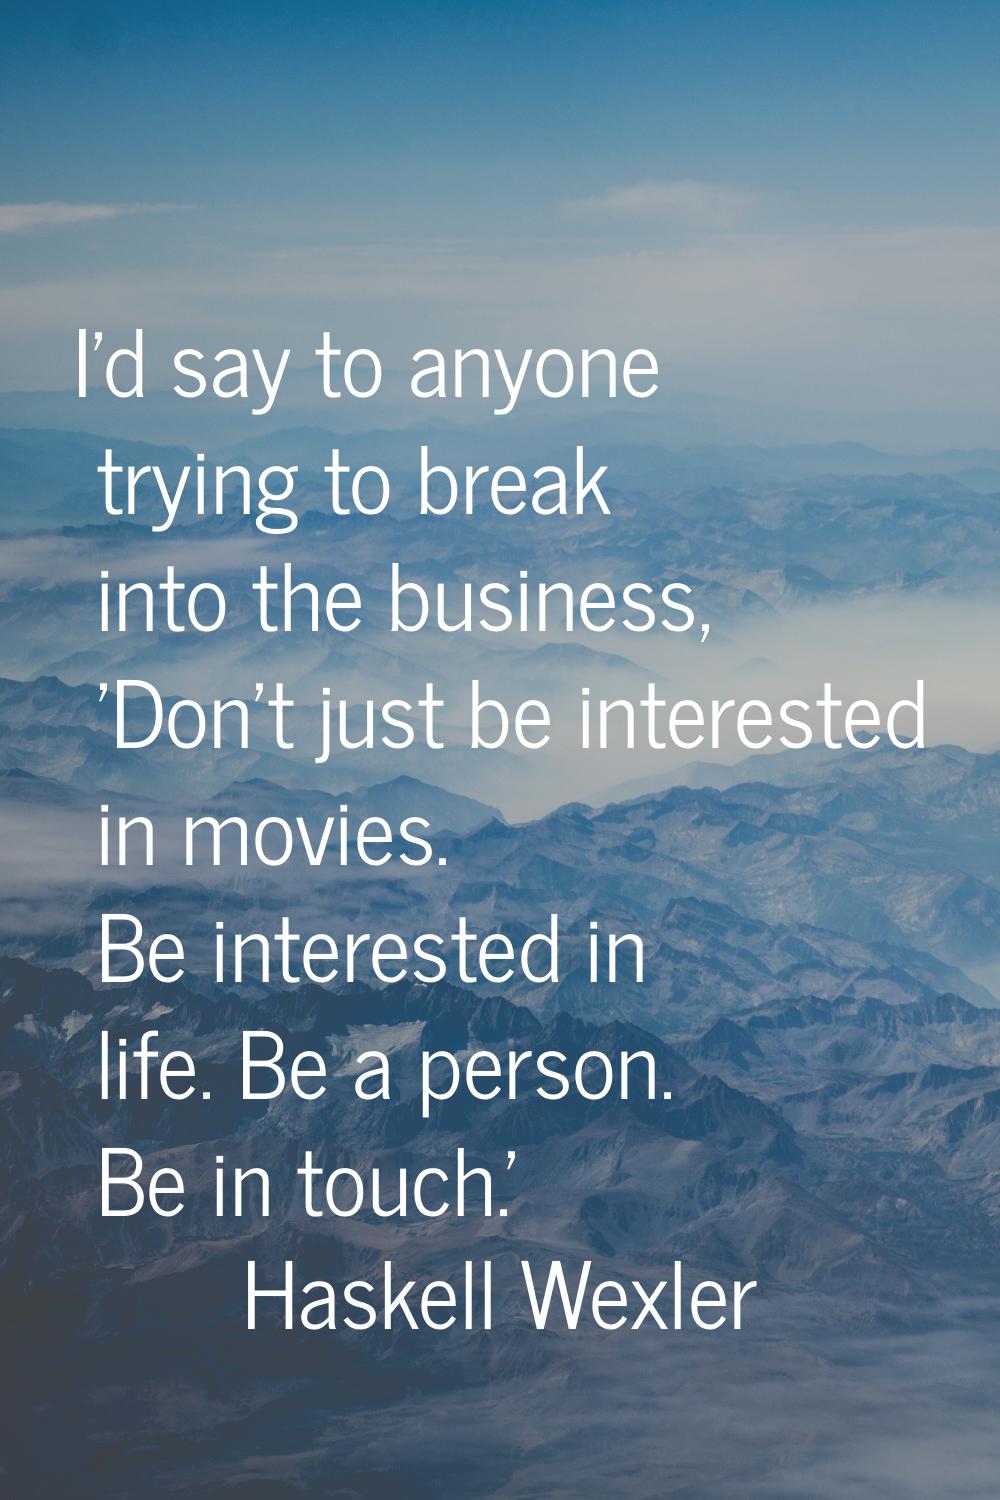 I'd say to anyone trying to break into the business, 'Don't just be interested in movies. Be intere